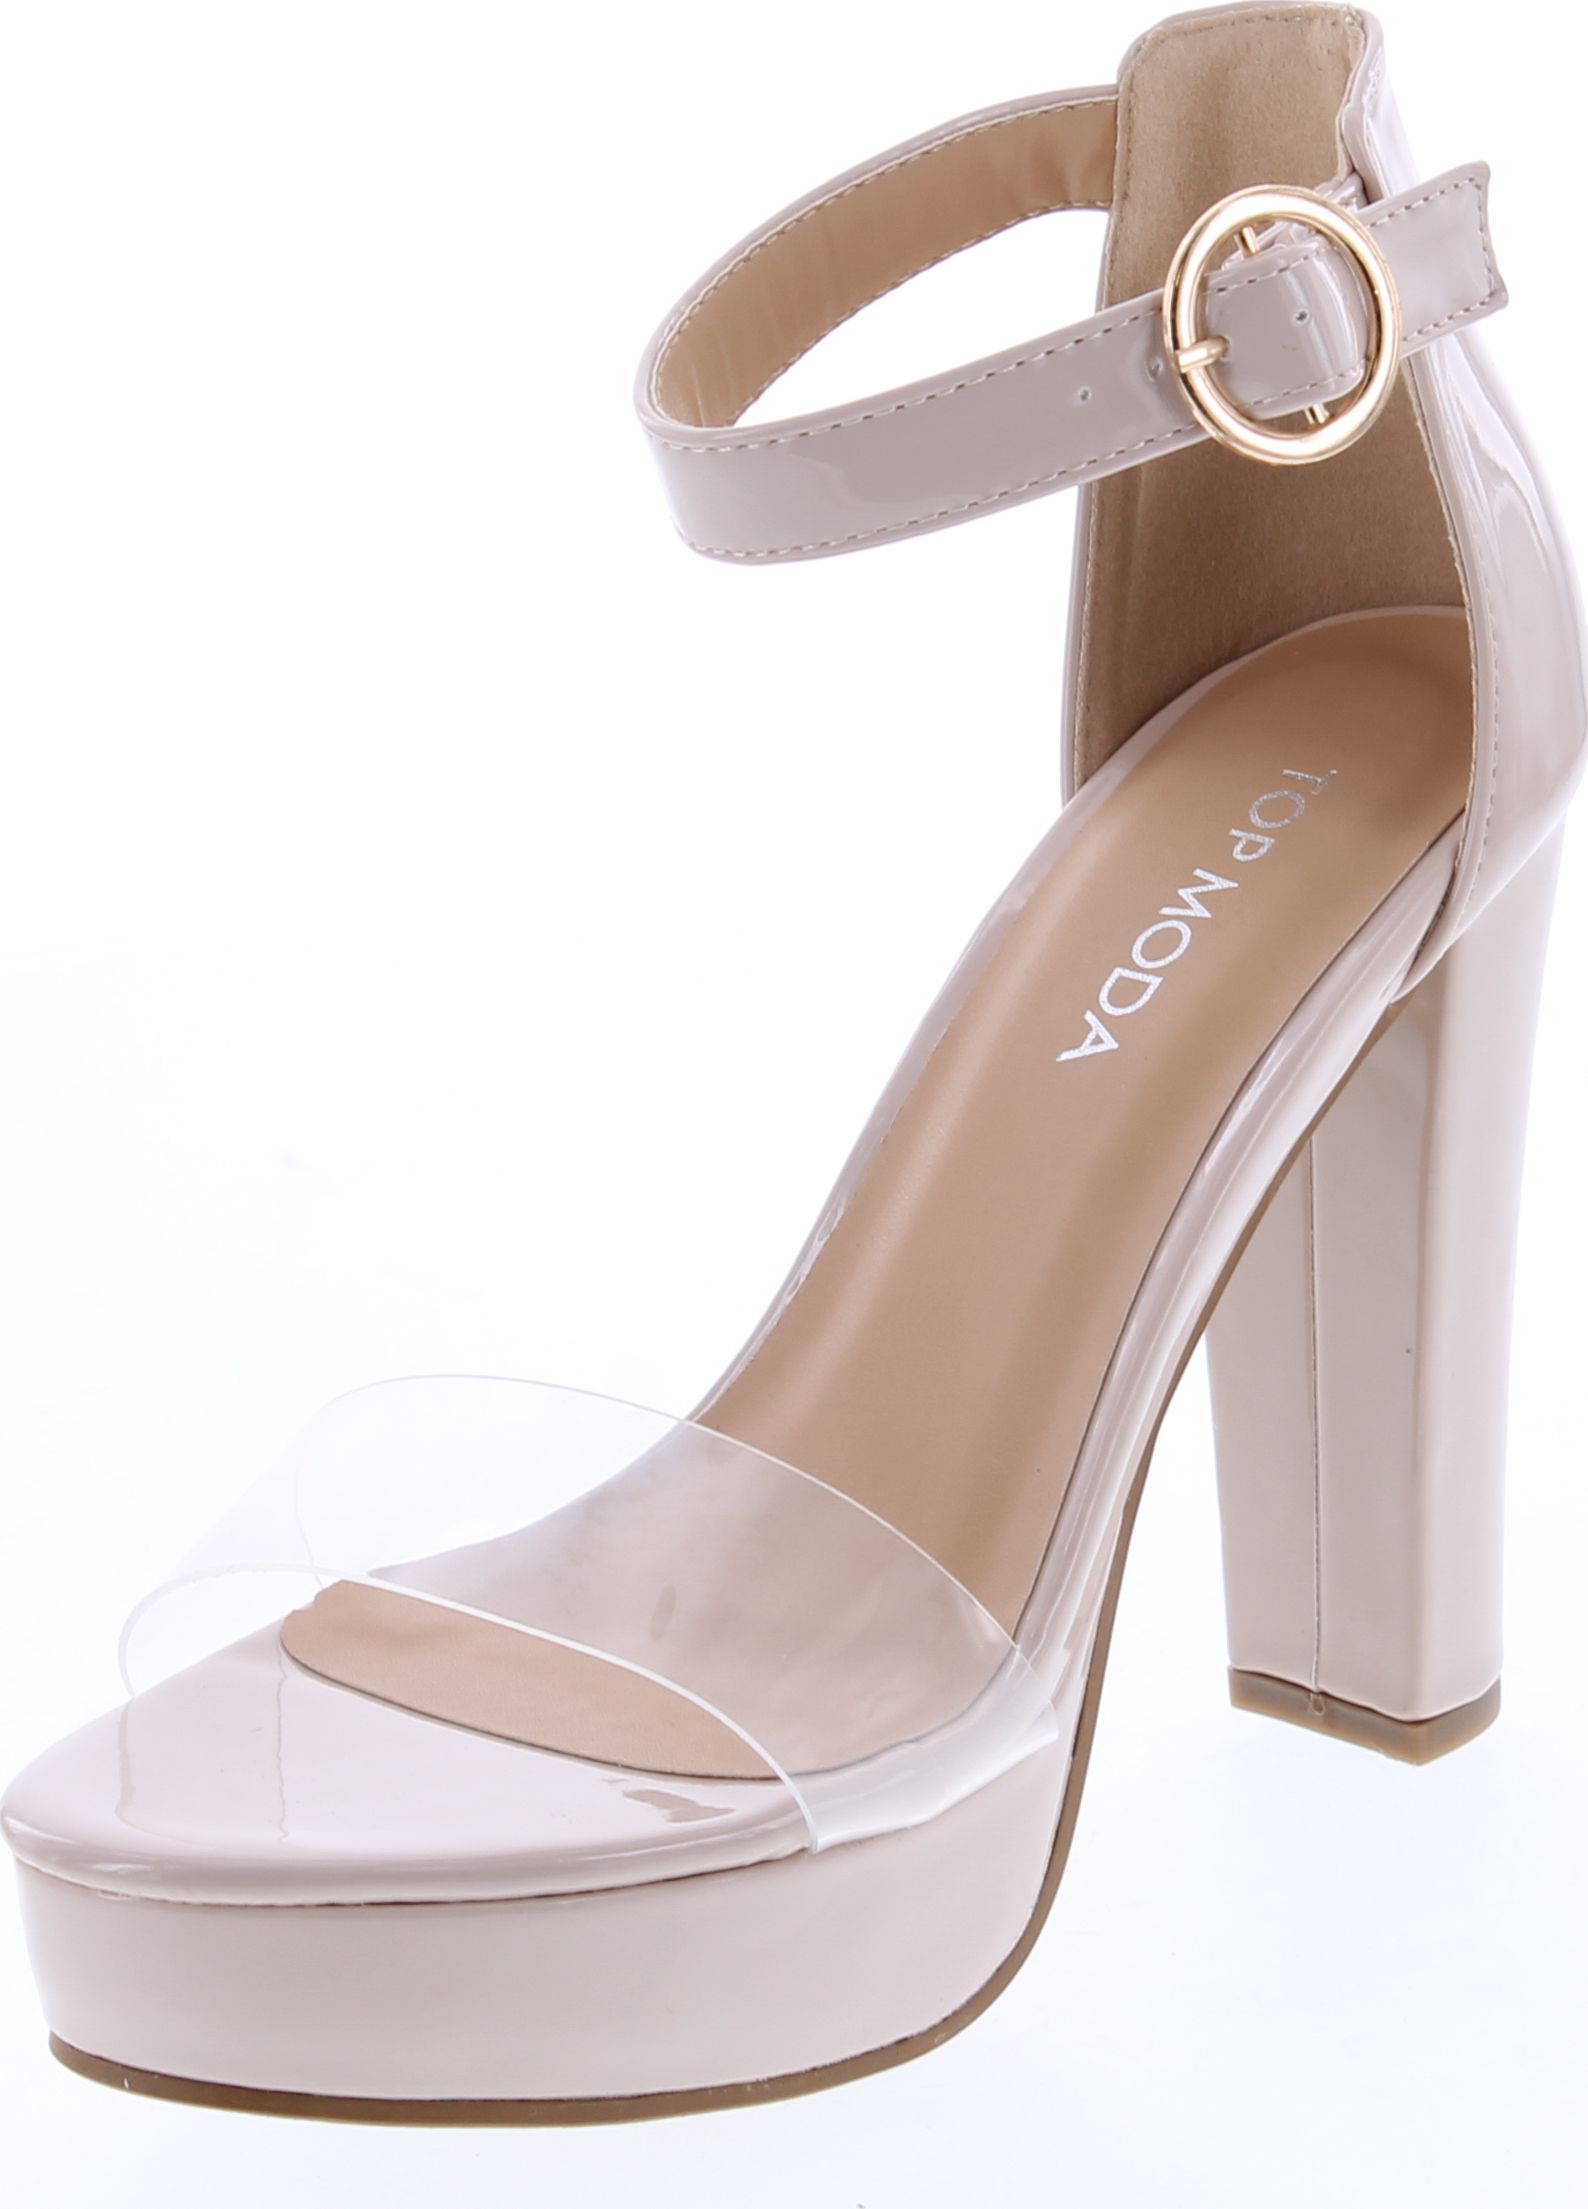 Top Moda Womens Robin-1 Transparent Lucite Party Dress High Heels Shoes - image 1 of 7